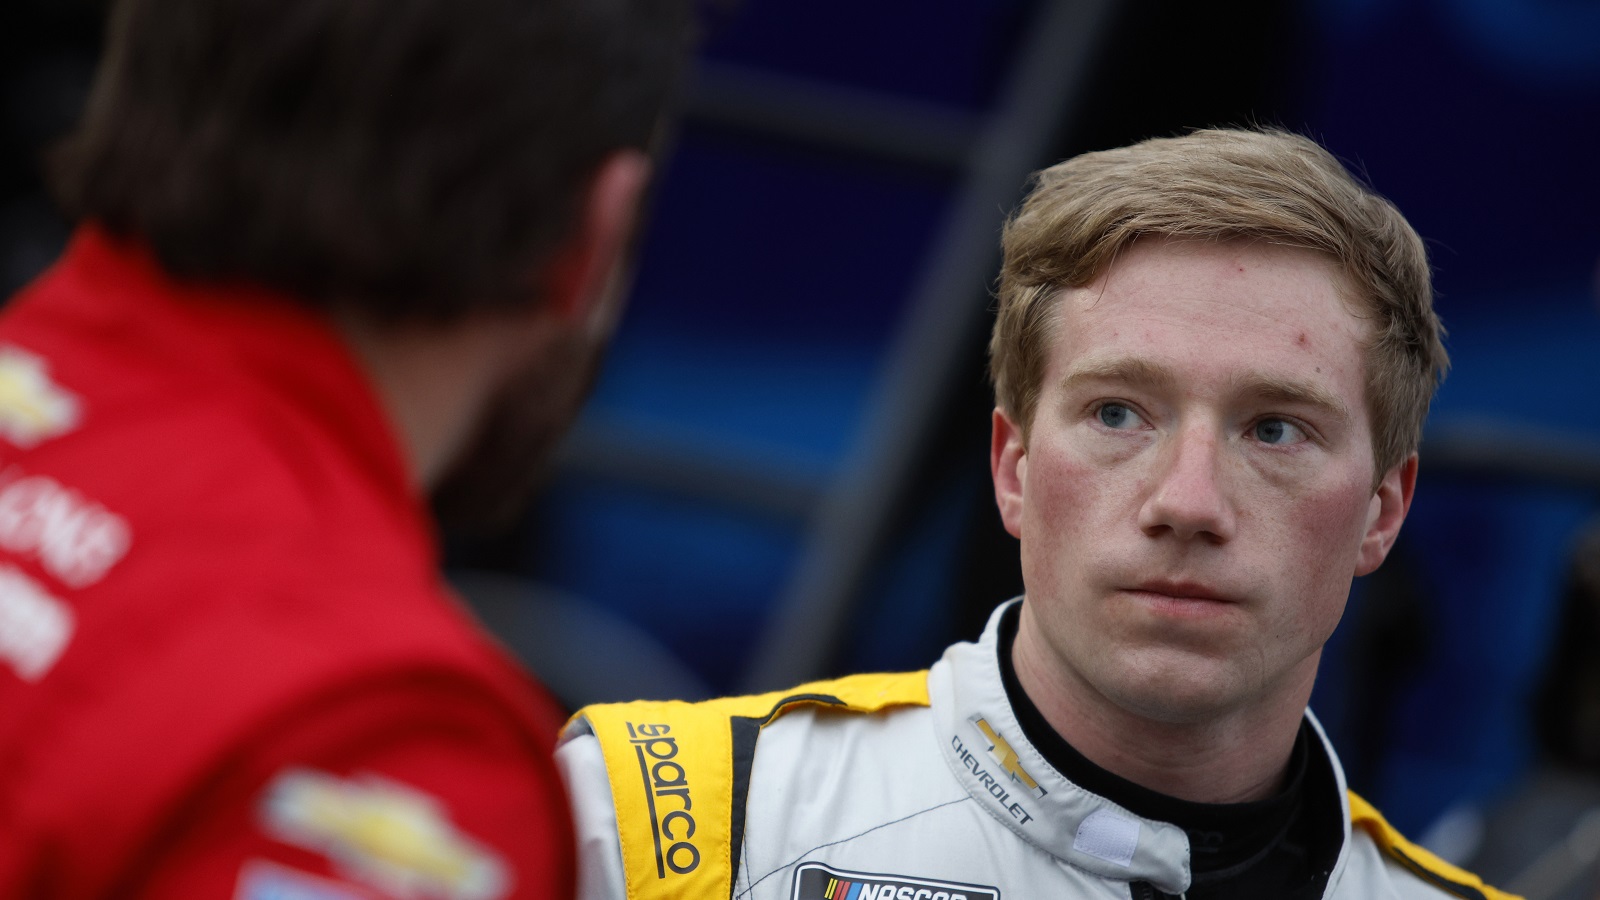 Tyler Reddick, driver of the No. 8 Chevrolet, looks on in the garage area during practice for the NASCAR Cup Series Daytona 500 on Feb. 15, 2022, in Daytona Beach, Florida. | Sean Gardner/Getty Images